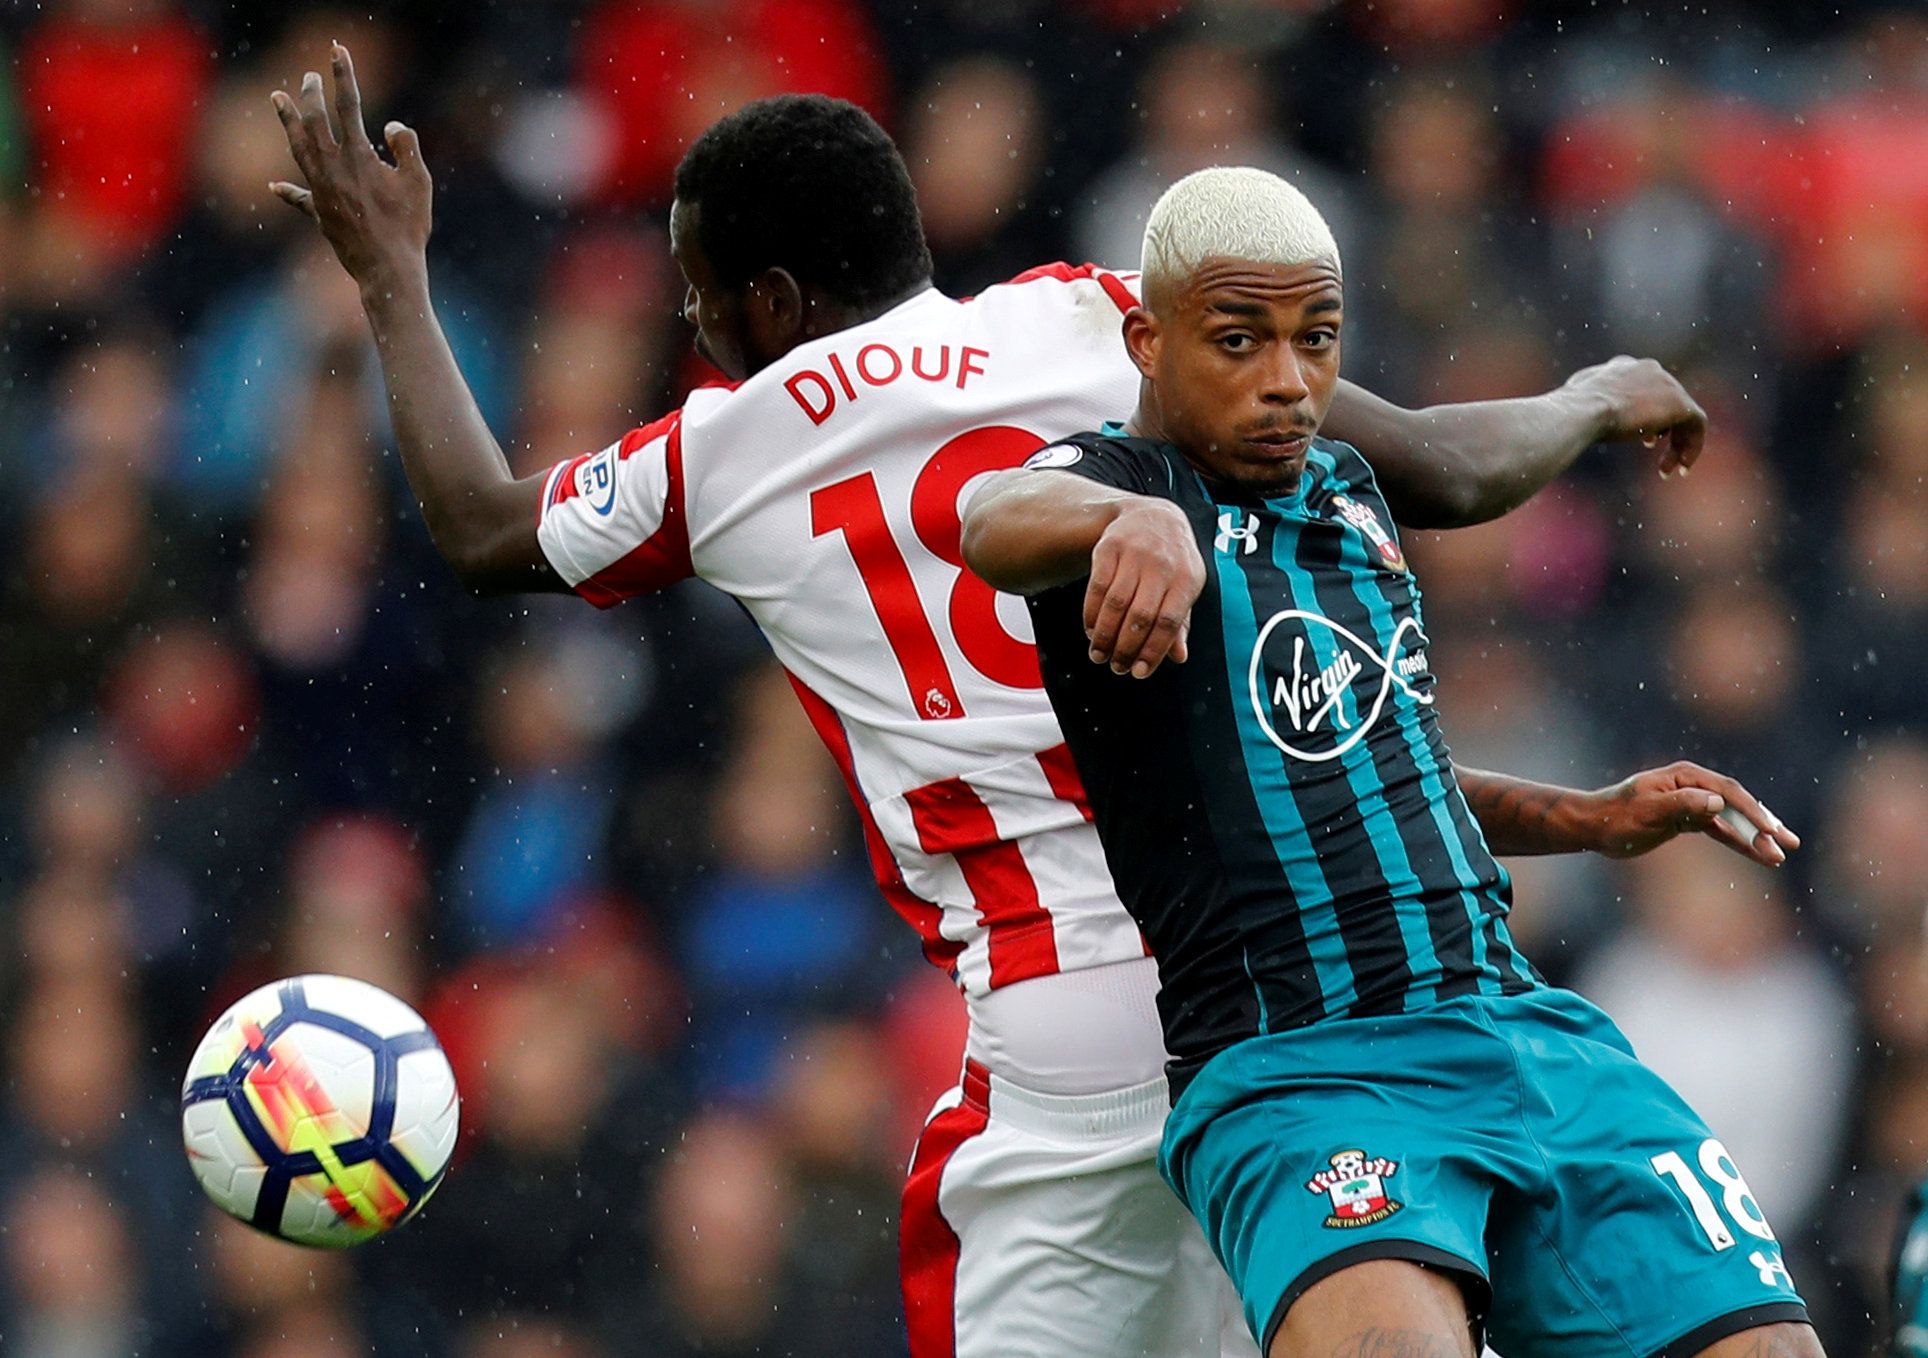 Soccer Football - Premier League - Stoke City vs Southampton - bet365 Stadium, Stoke, Britain - September 30, 2017  Stoke City's Mame Biram Diouf in action with Southampton's Mario Lemina    REUTERS/Darren Staples  EDITORIAL USE ONLY. No use with unauthorized audio, video, data, fixture lists, club/league logos or 